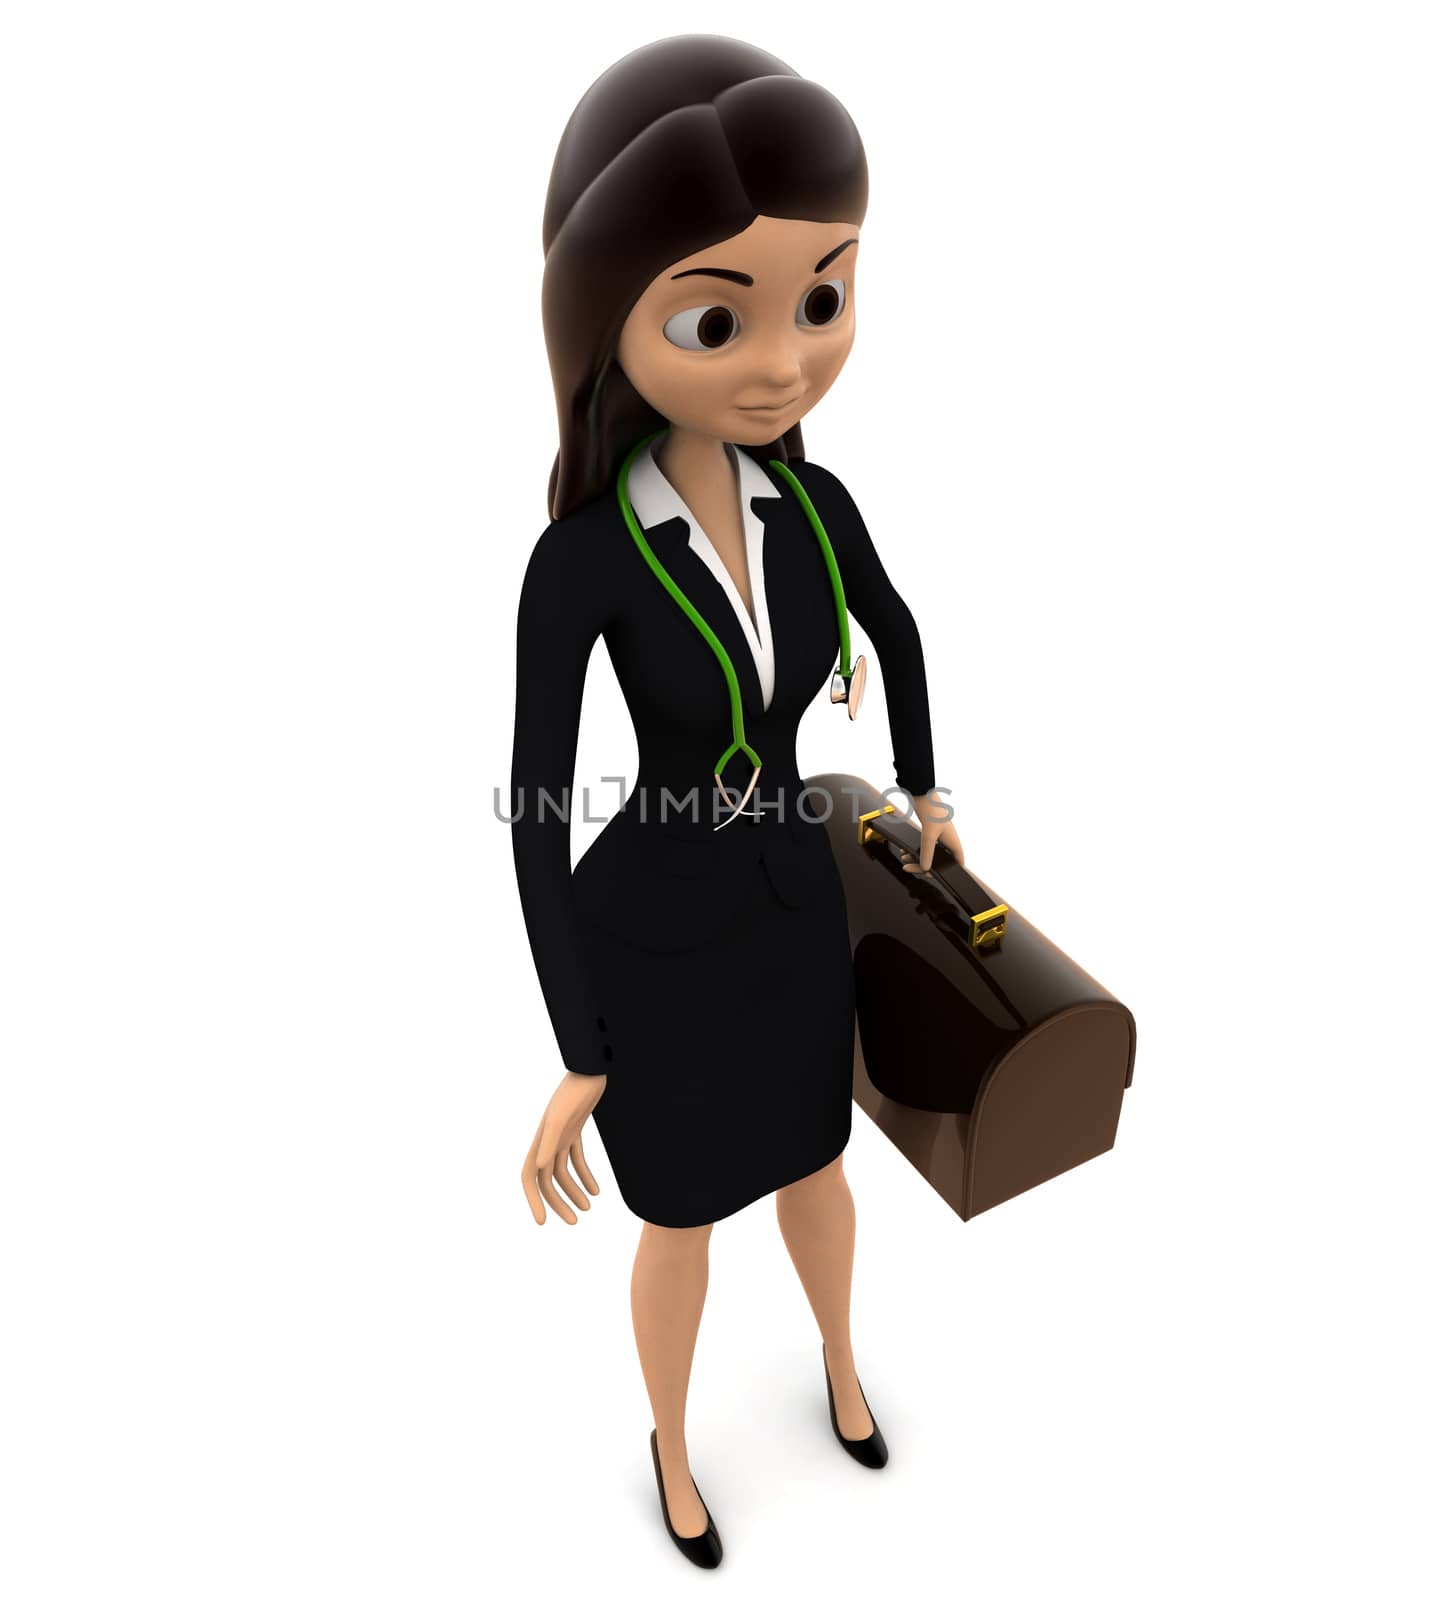 3d woman stanidng with brown bag and strethoscope on neck concept on white background, top angle view